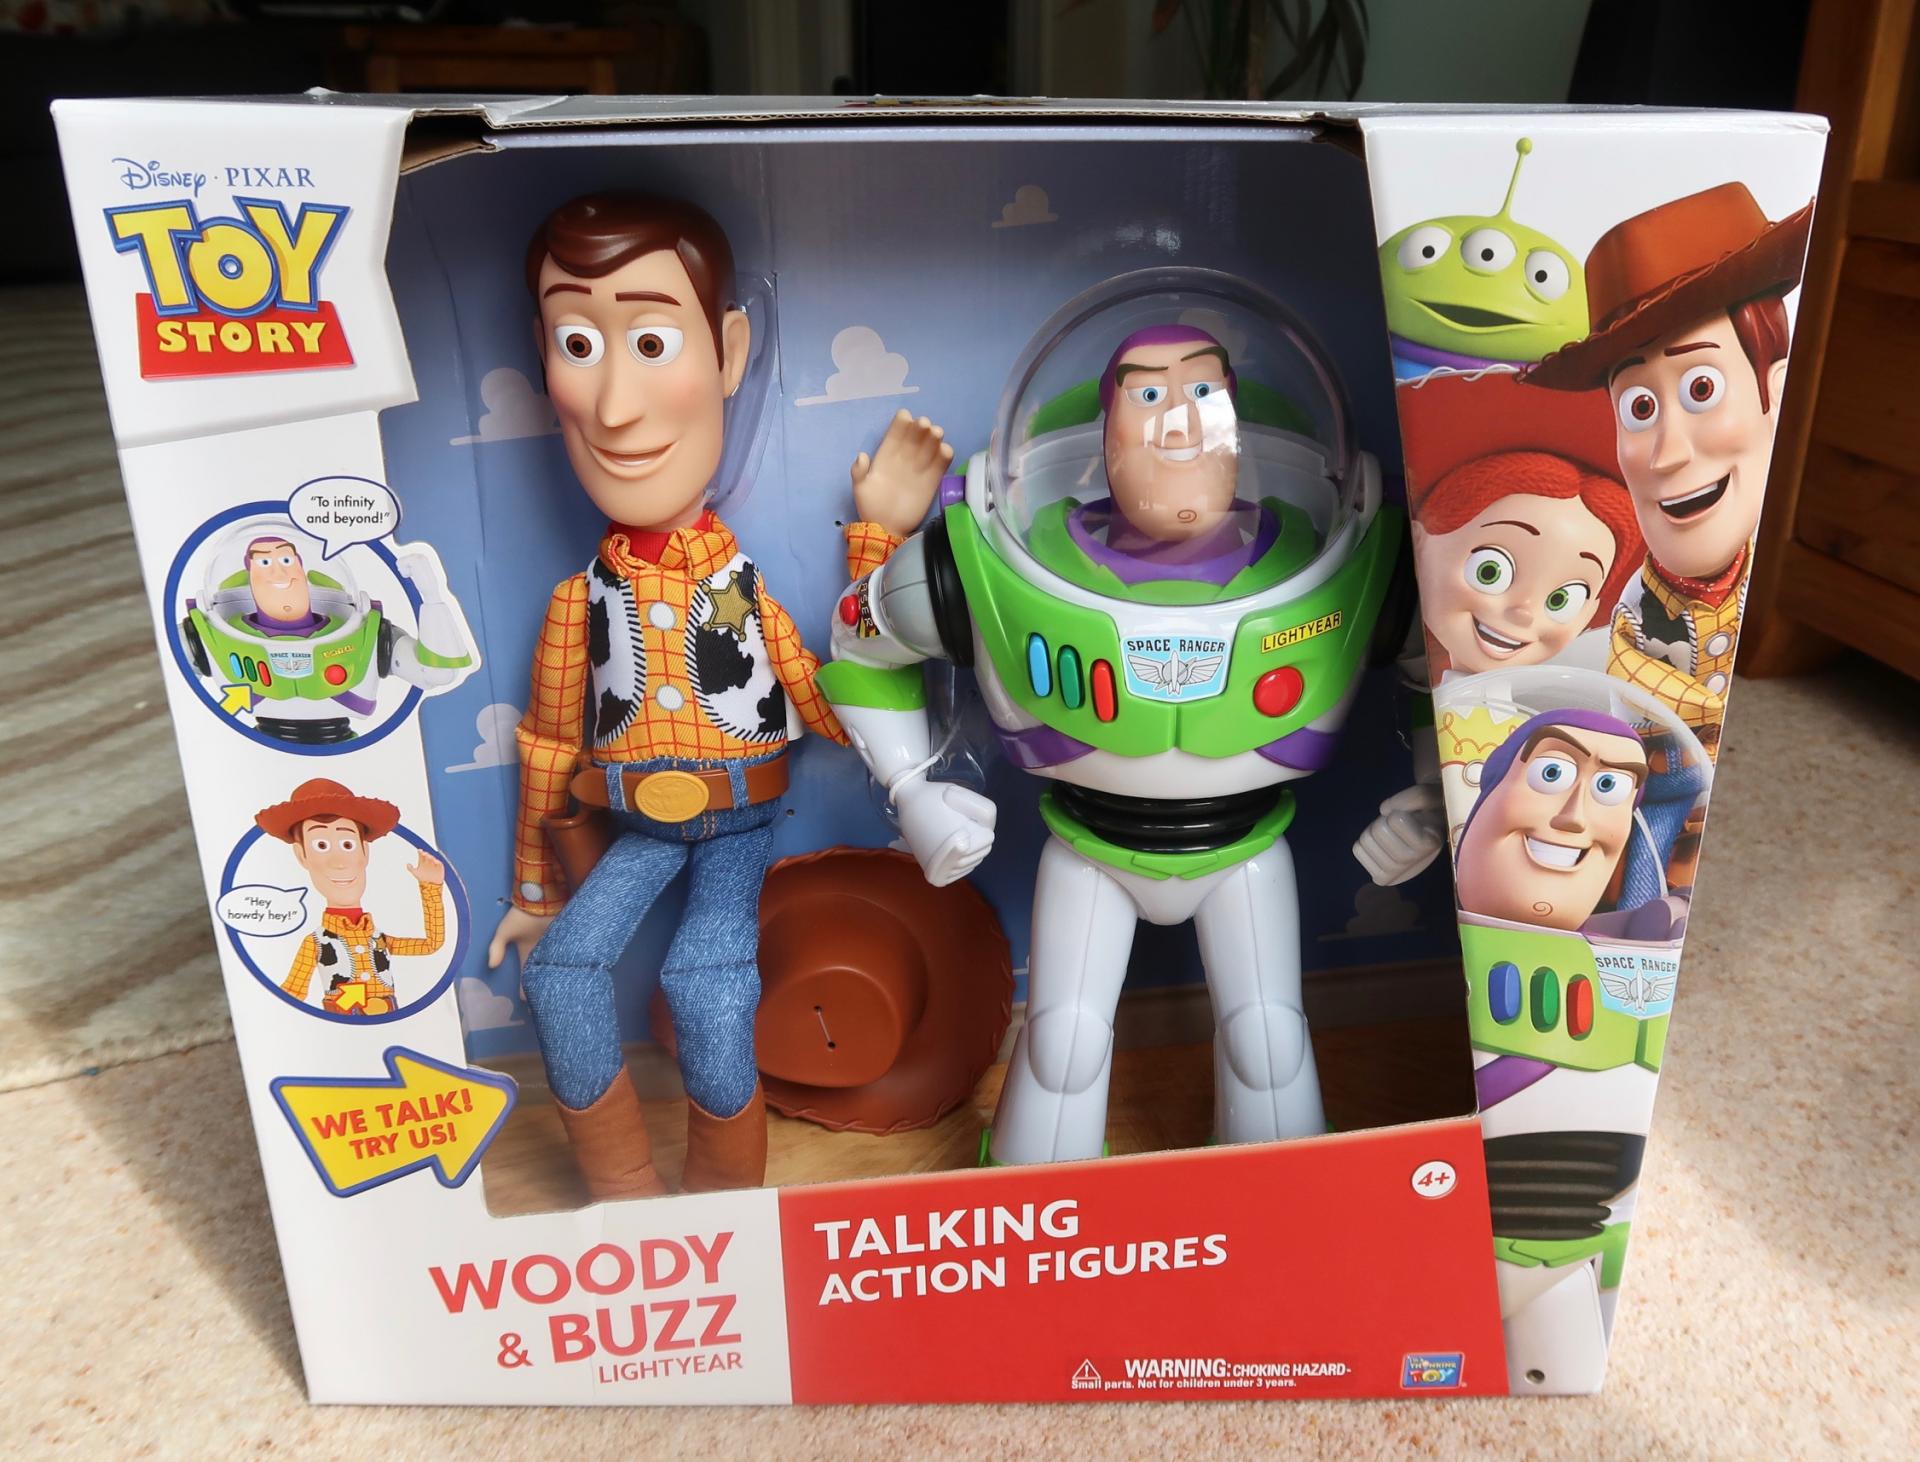 You've Got a Friend in Me - with Buzz and Woody #ThinkWayFriends - Run ...